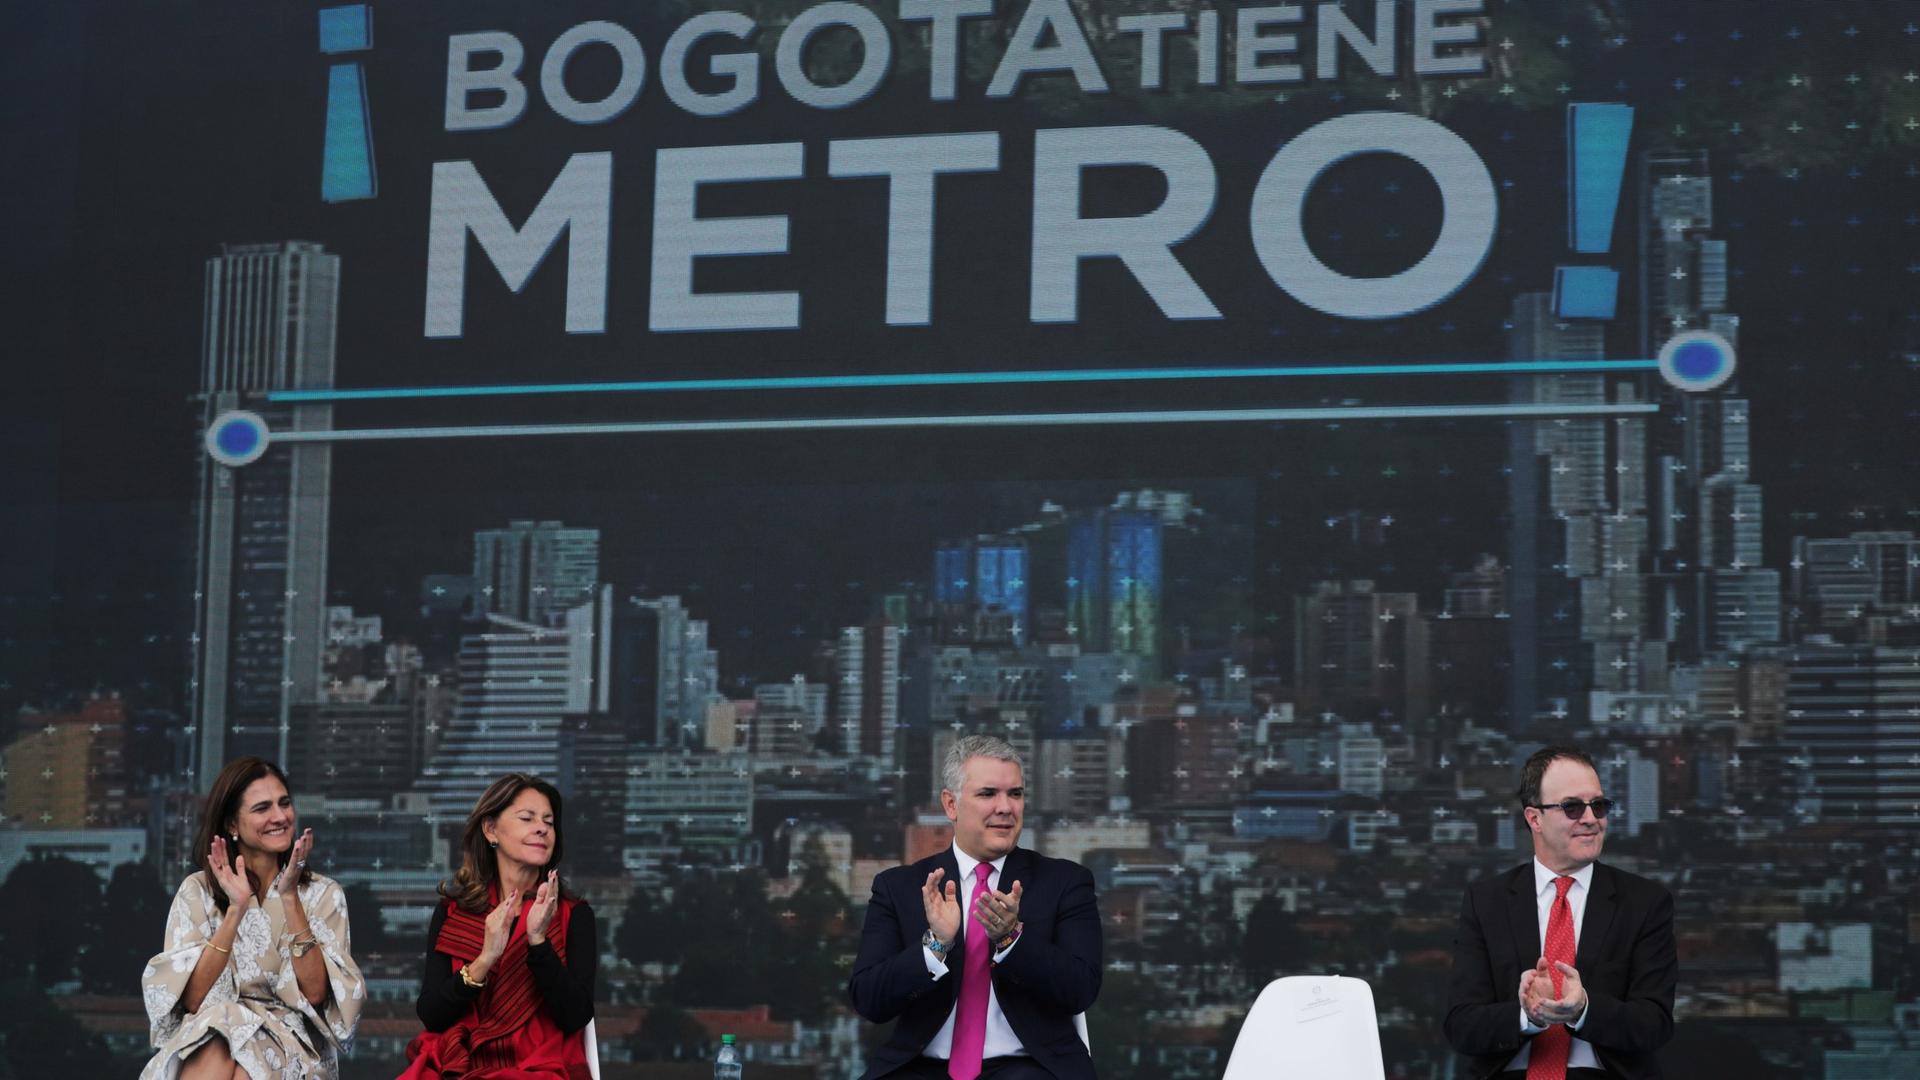 Colombia's President Iván Duque, reacts during the presentation of the award of the contract for the construction of the Bogotá subway, Oct. 17, 2019.